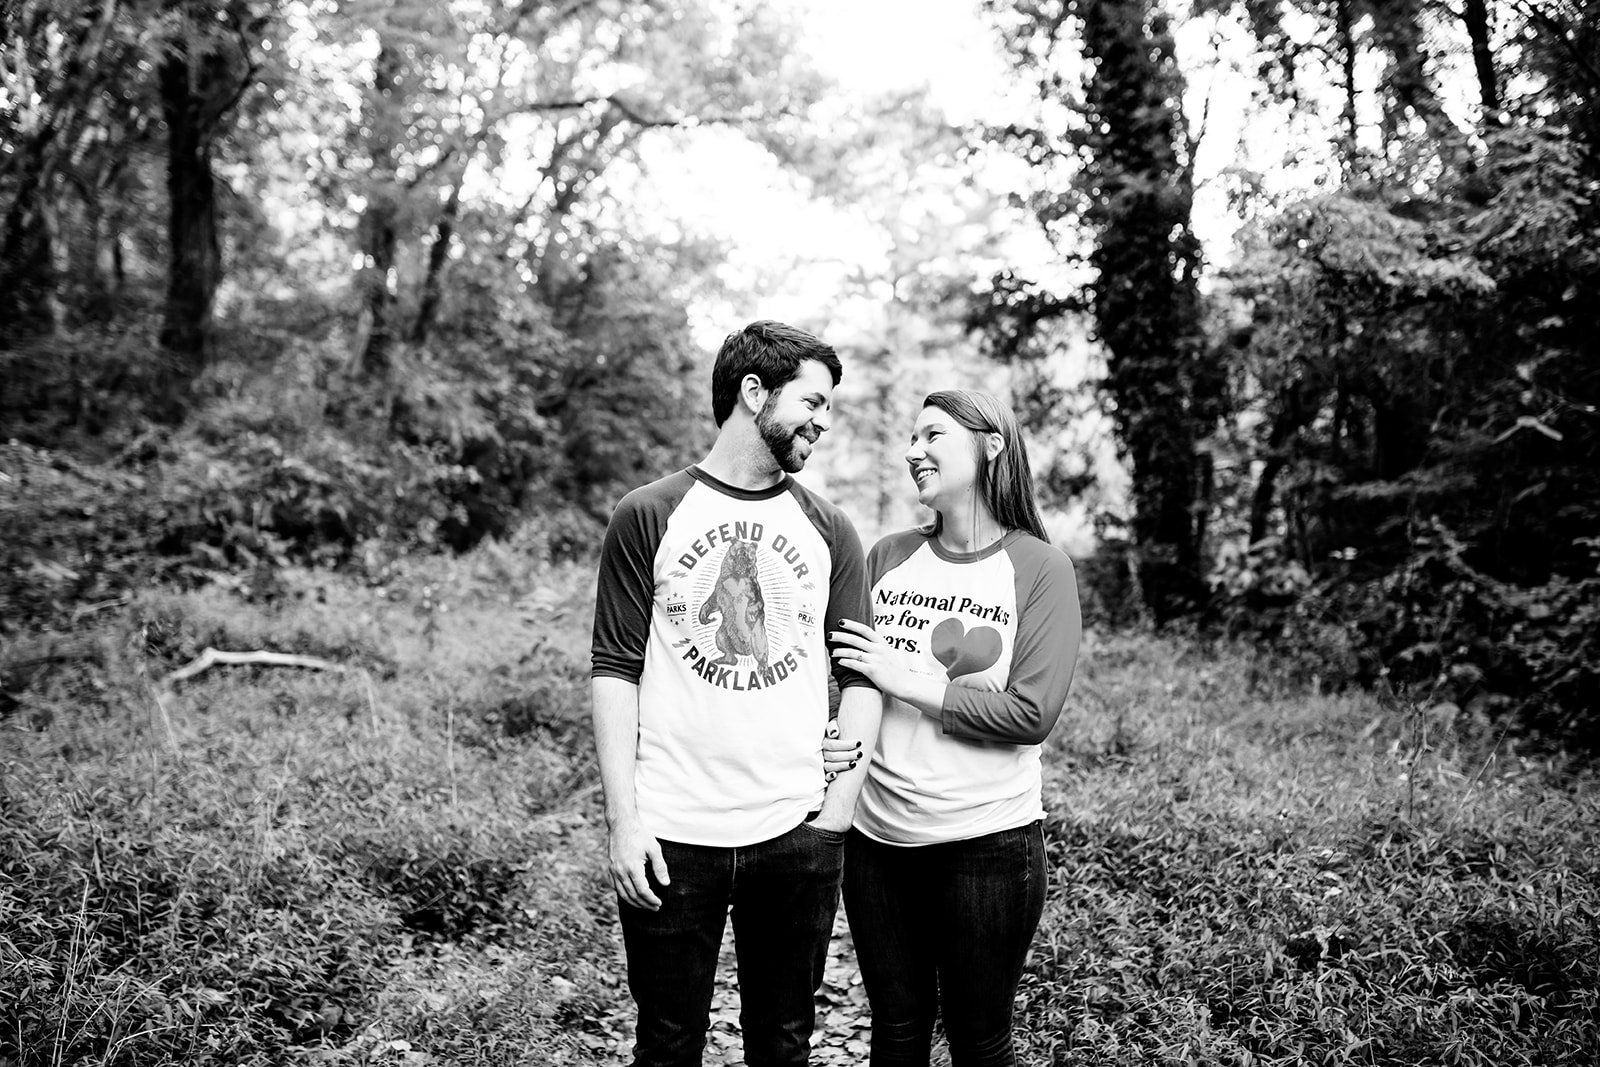 Taylor  Nathans National Park Hiking Themed Engagement Shoot - Image Property of www.j-dphoto.com